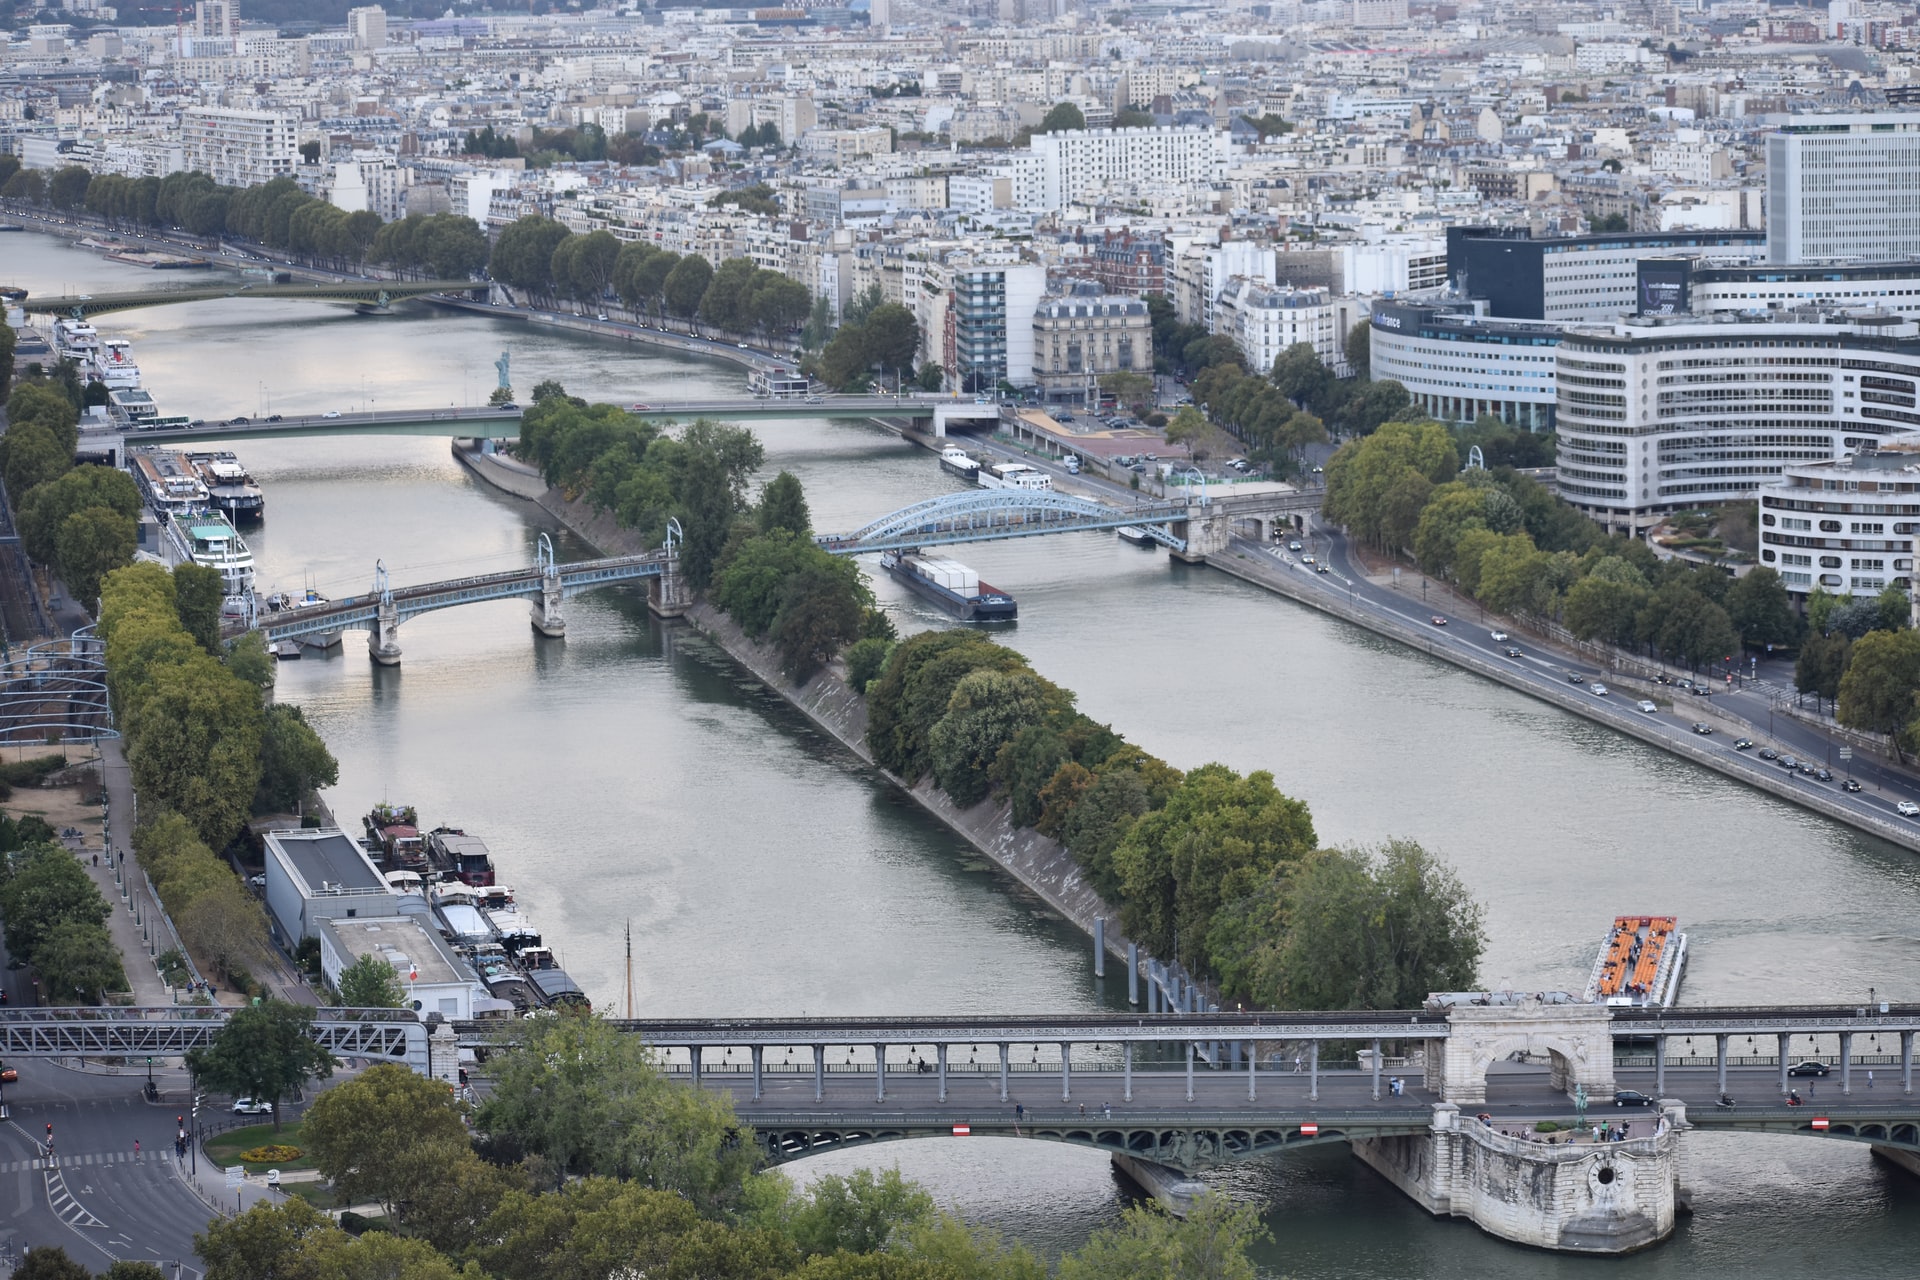 View of the Seine as seen from the Eiffel Tower